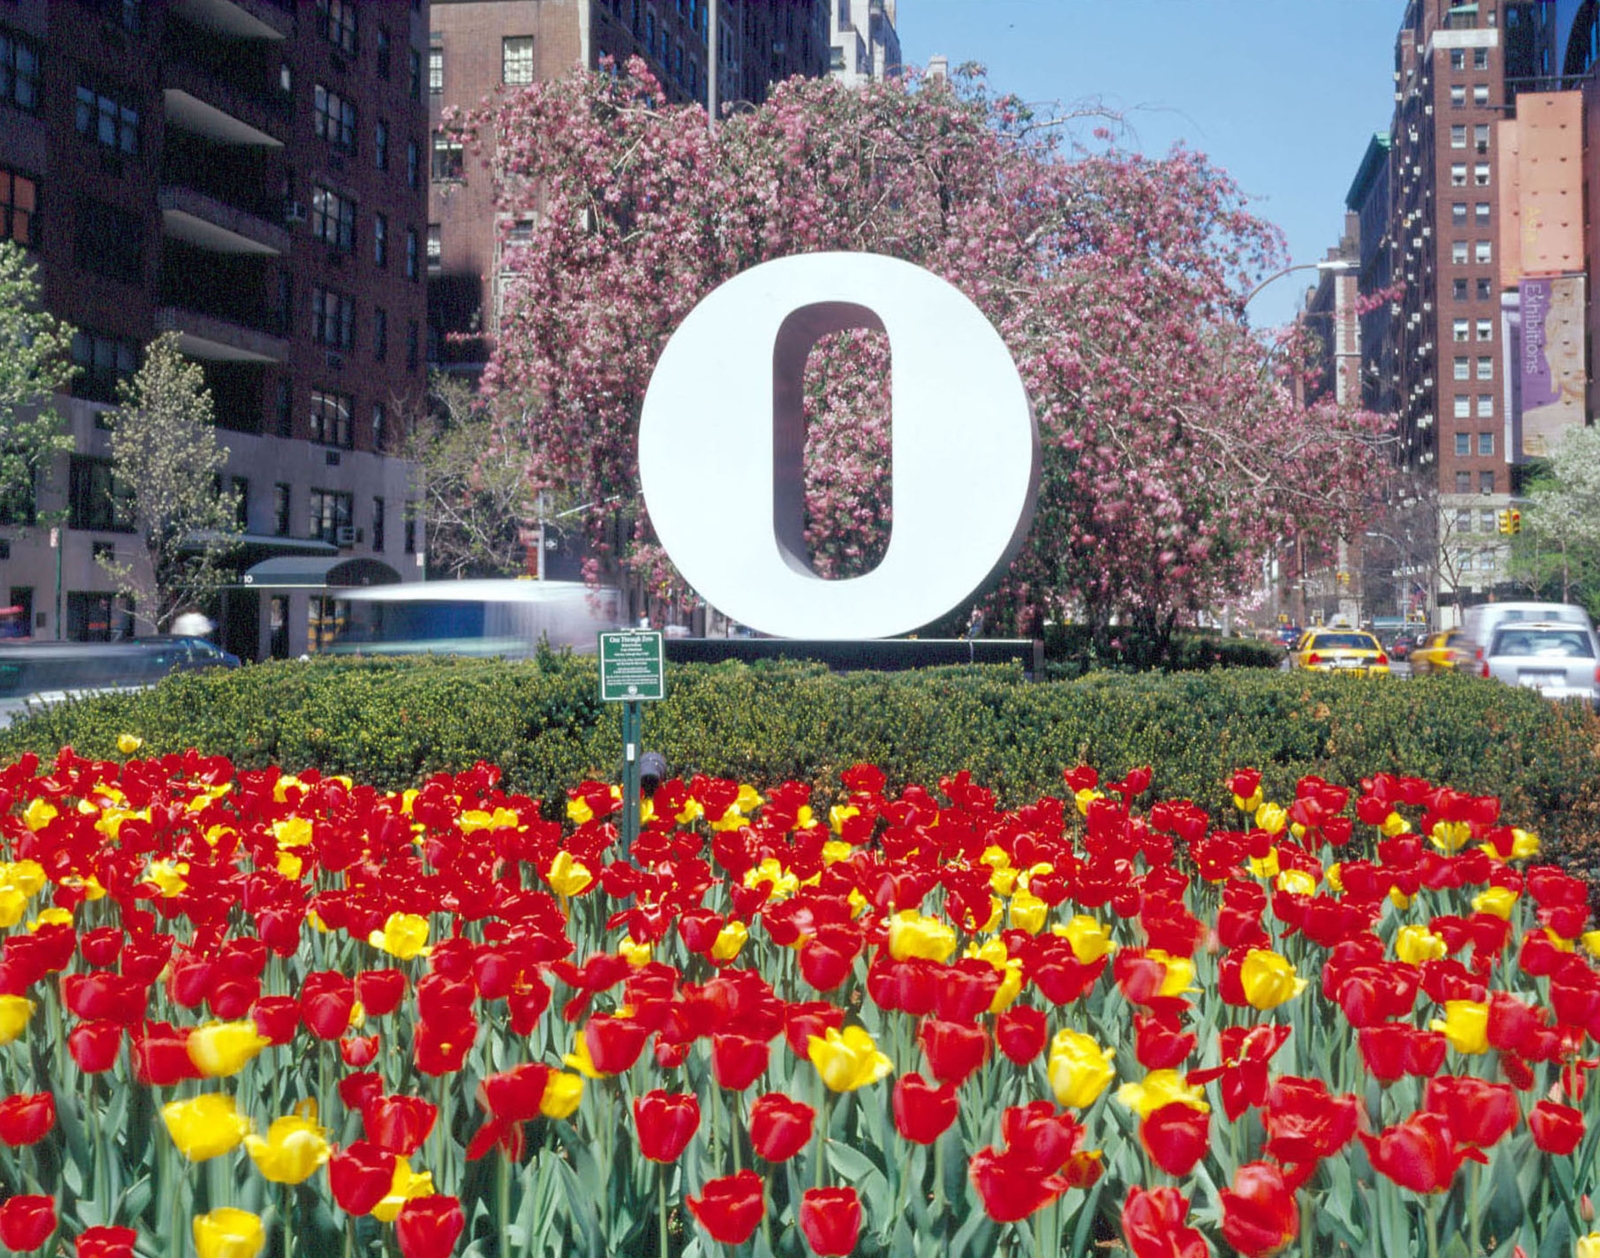 Indiana&rsquo;s sculpture ZERO (1980) installed on the median at Park Avenue and Seventieth Street, New York, spring 2003